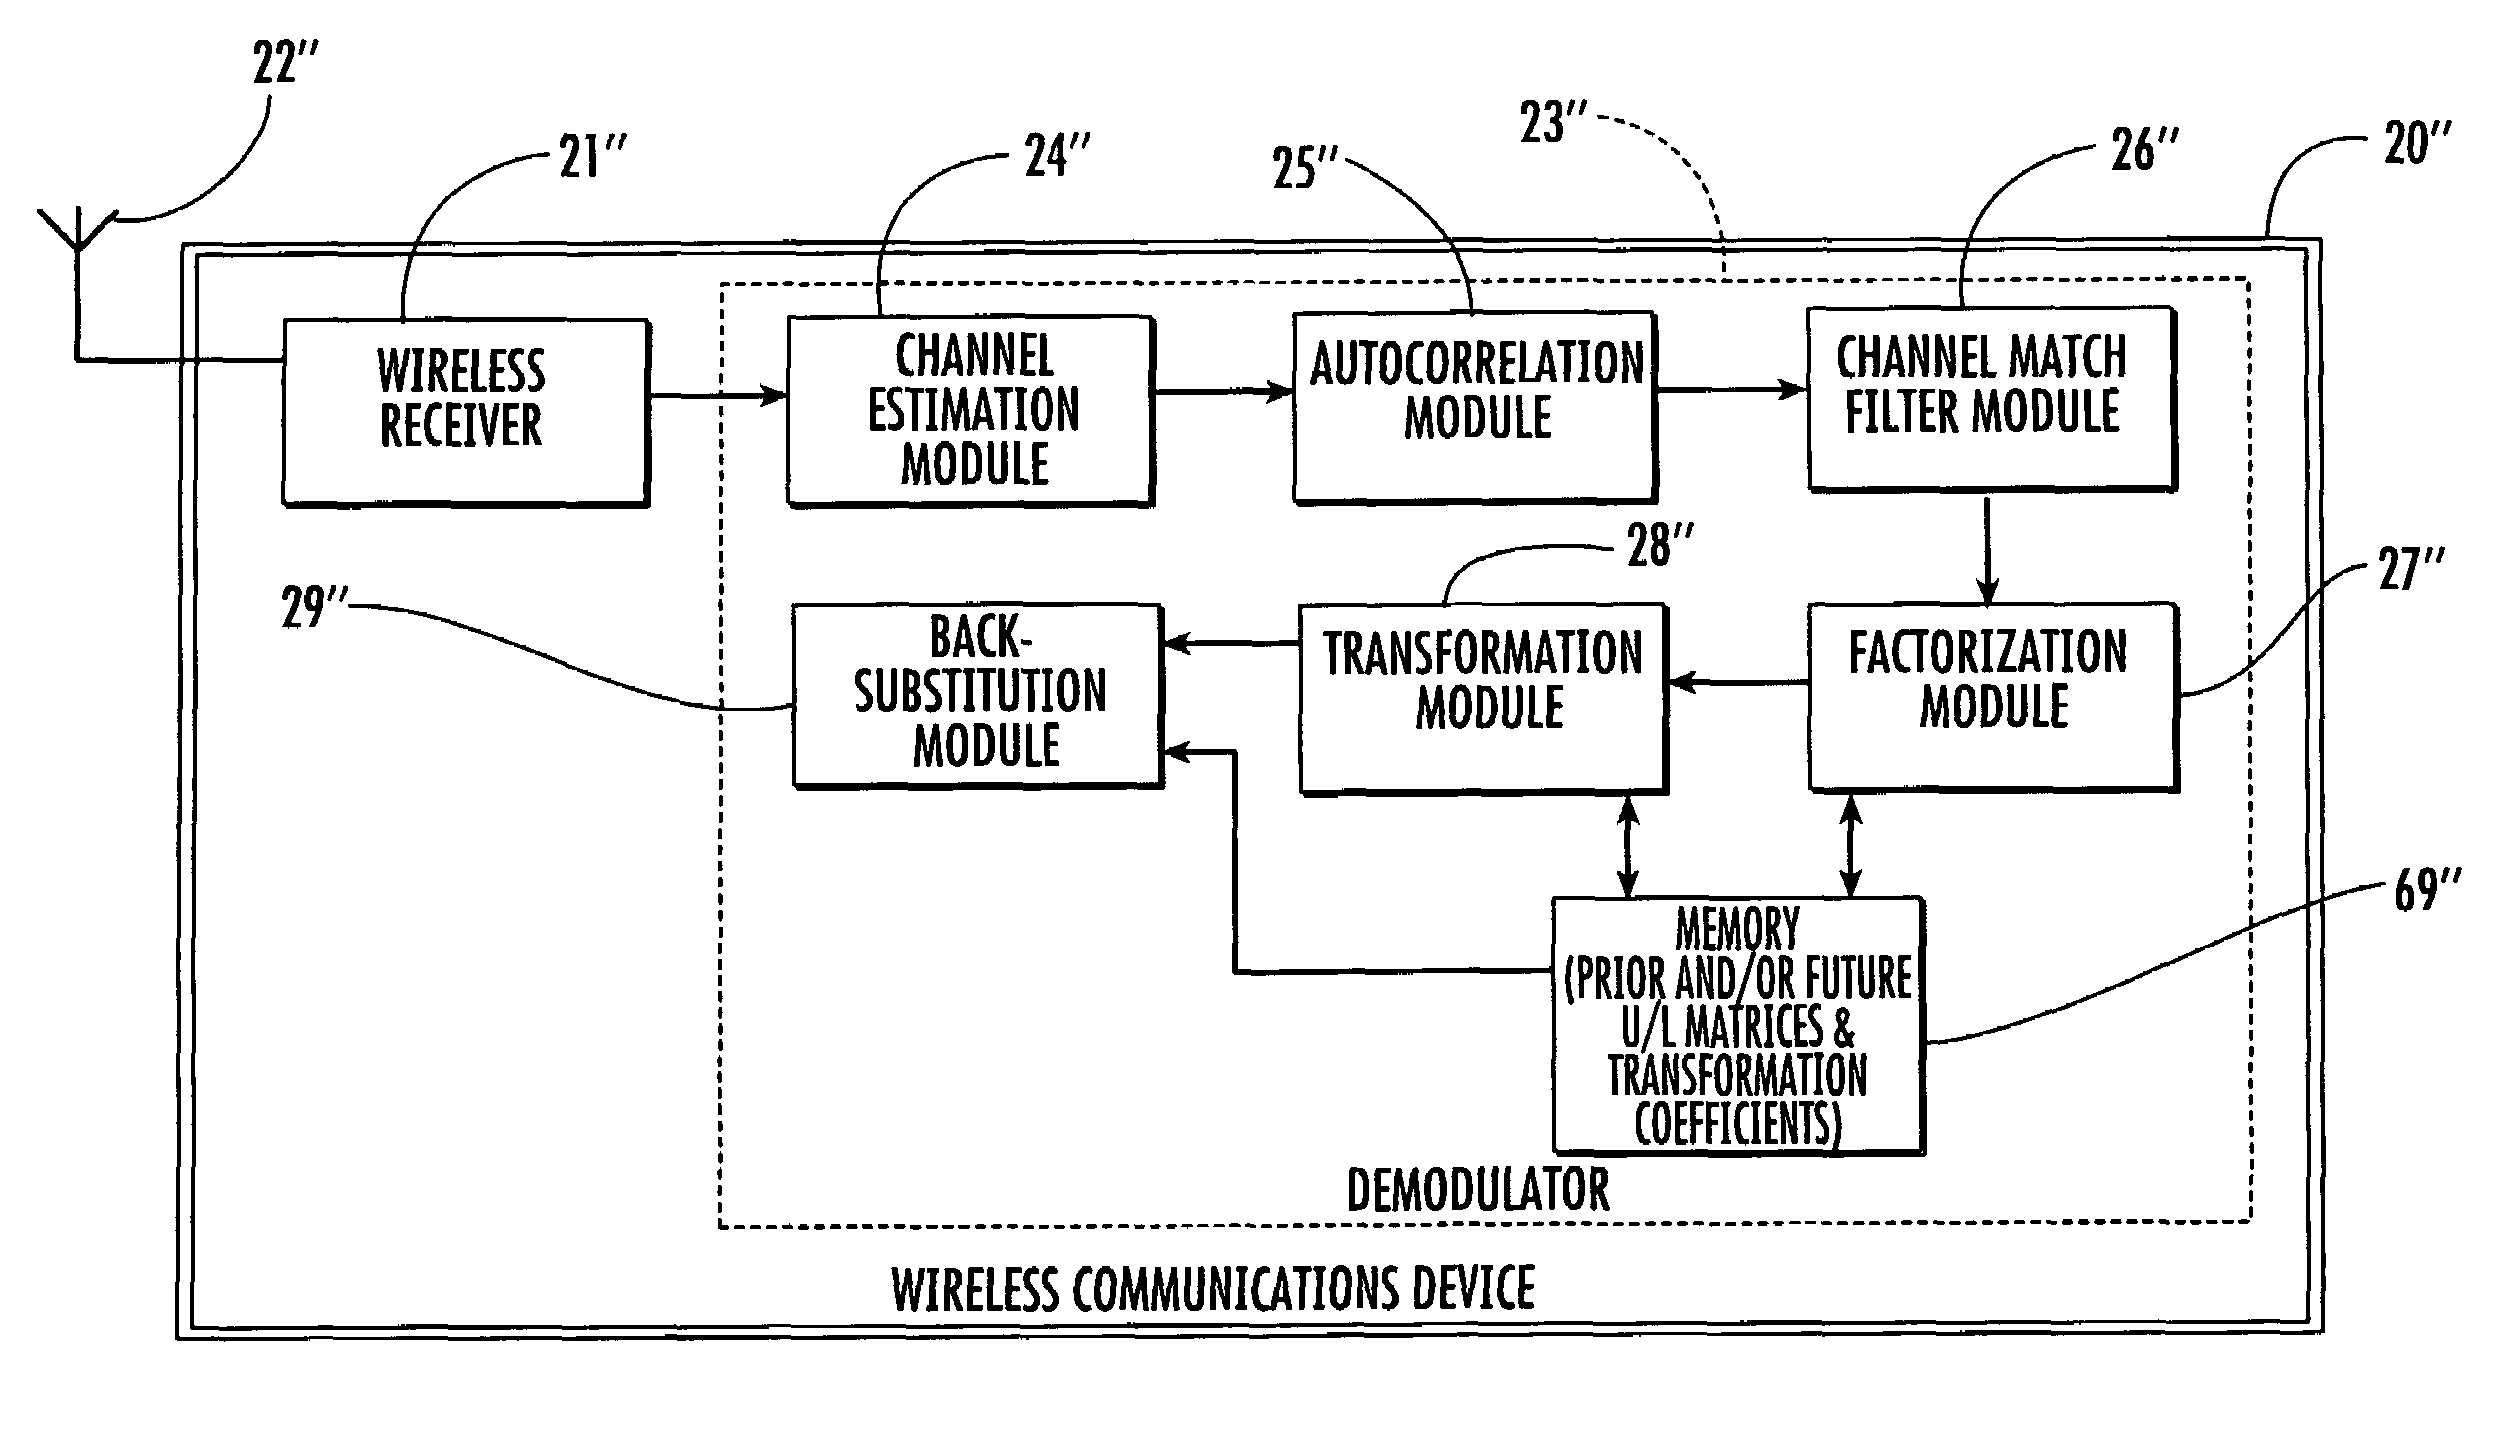 Wireless communications device performing block equalization based upon prior, current and/or future autocorrelation matrix estimates and related methods